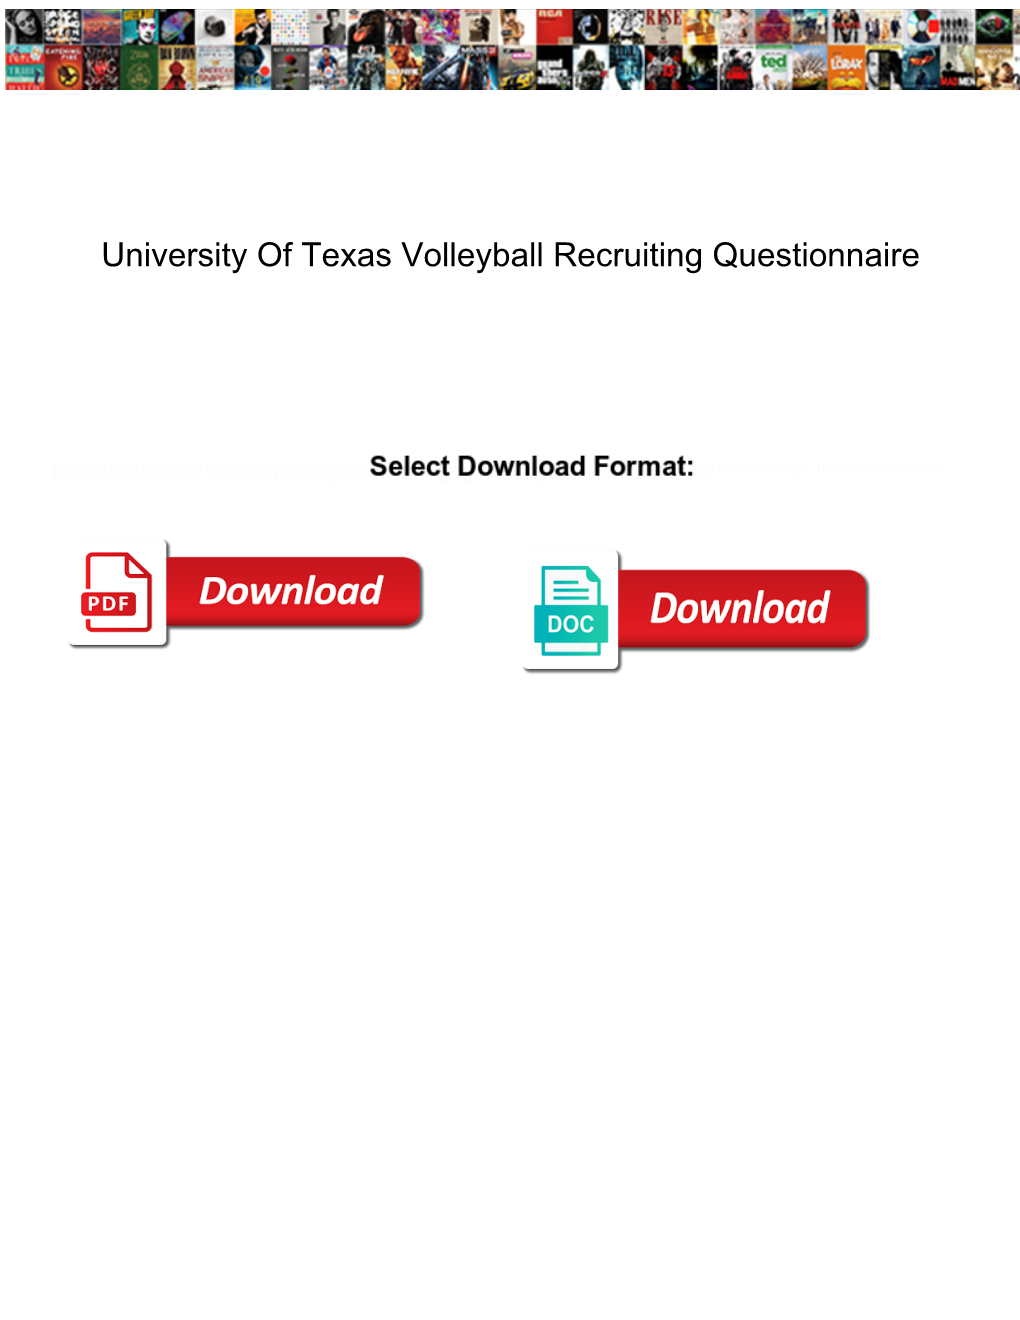 University of Texas Volleyball Recruiting Questionnaire